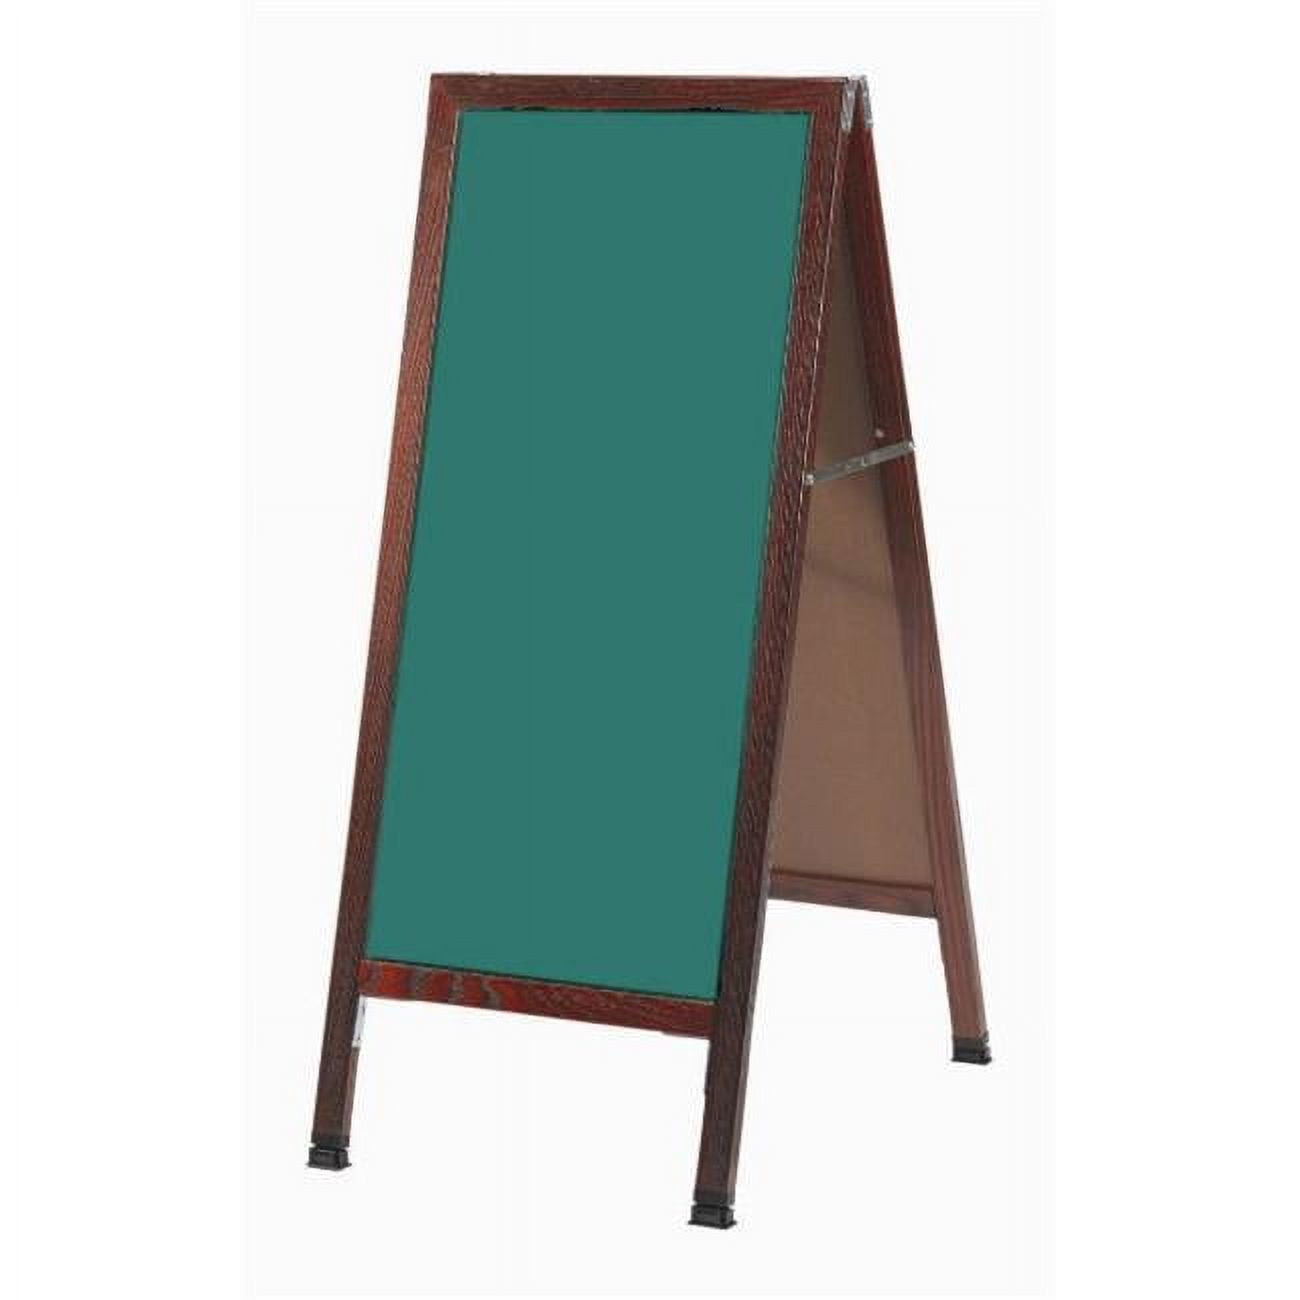 Aarco Products  Inc. MA-3G A-Frame Sidewalk Board Features a Green Composition Chalkboard and Solid Red Oak Frame with Cherry Stain. Size 42 in.Hx18 in.W - image 1 of 1